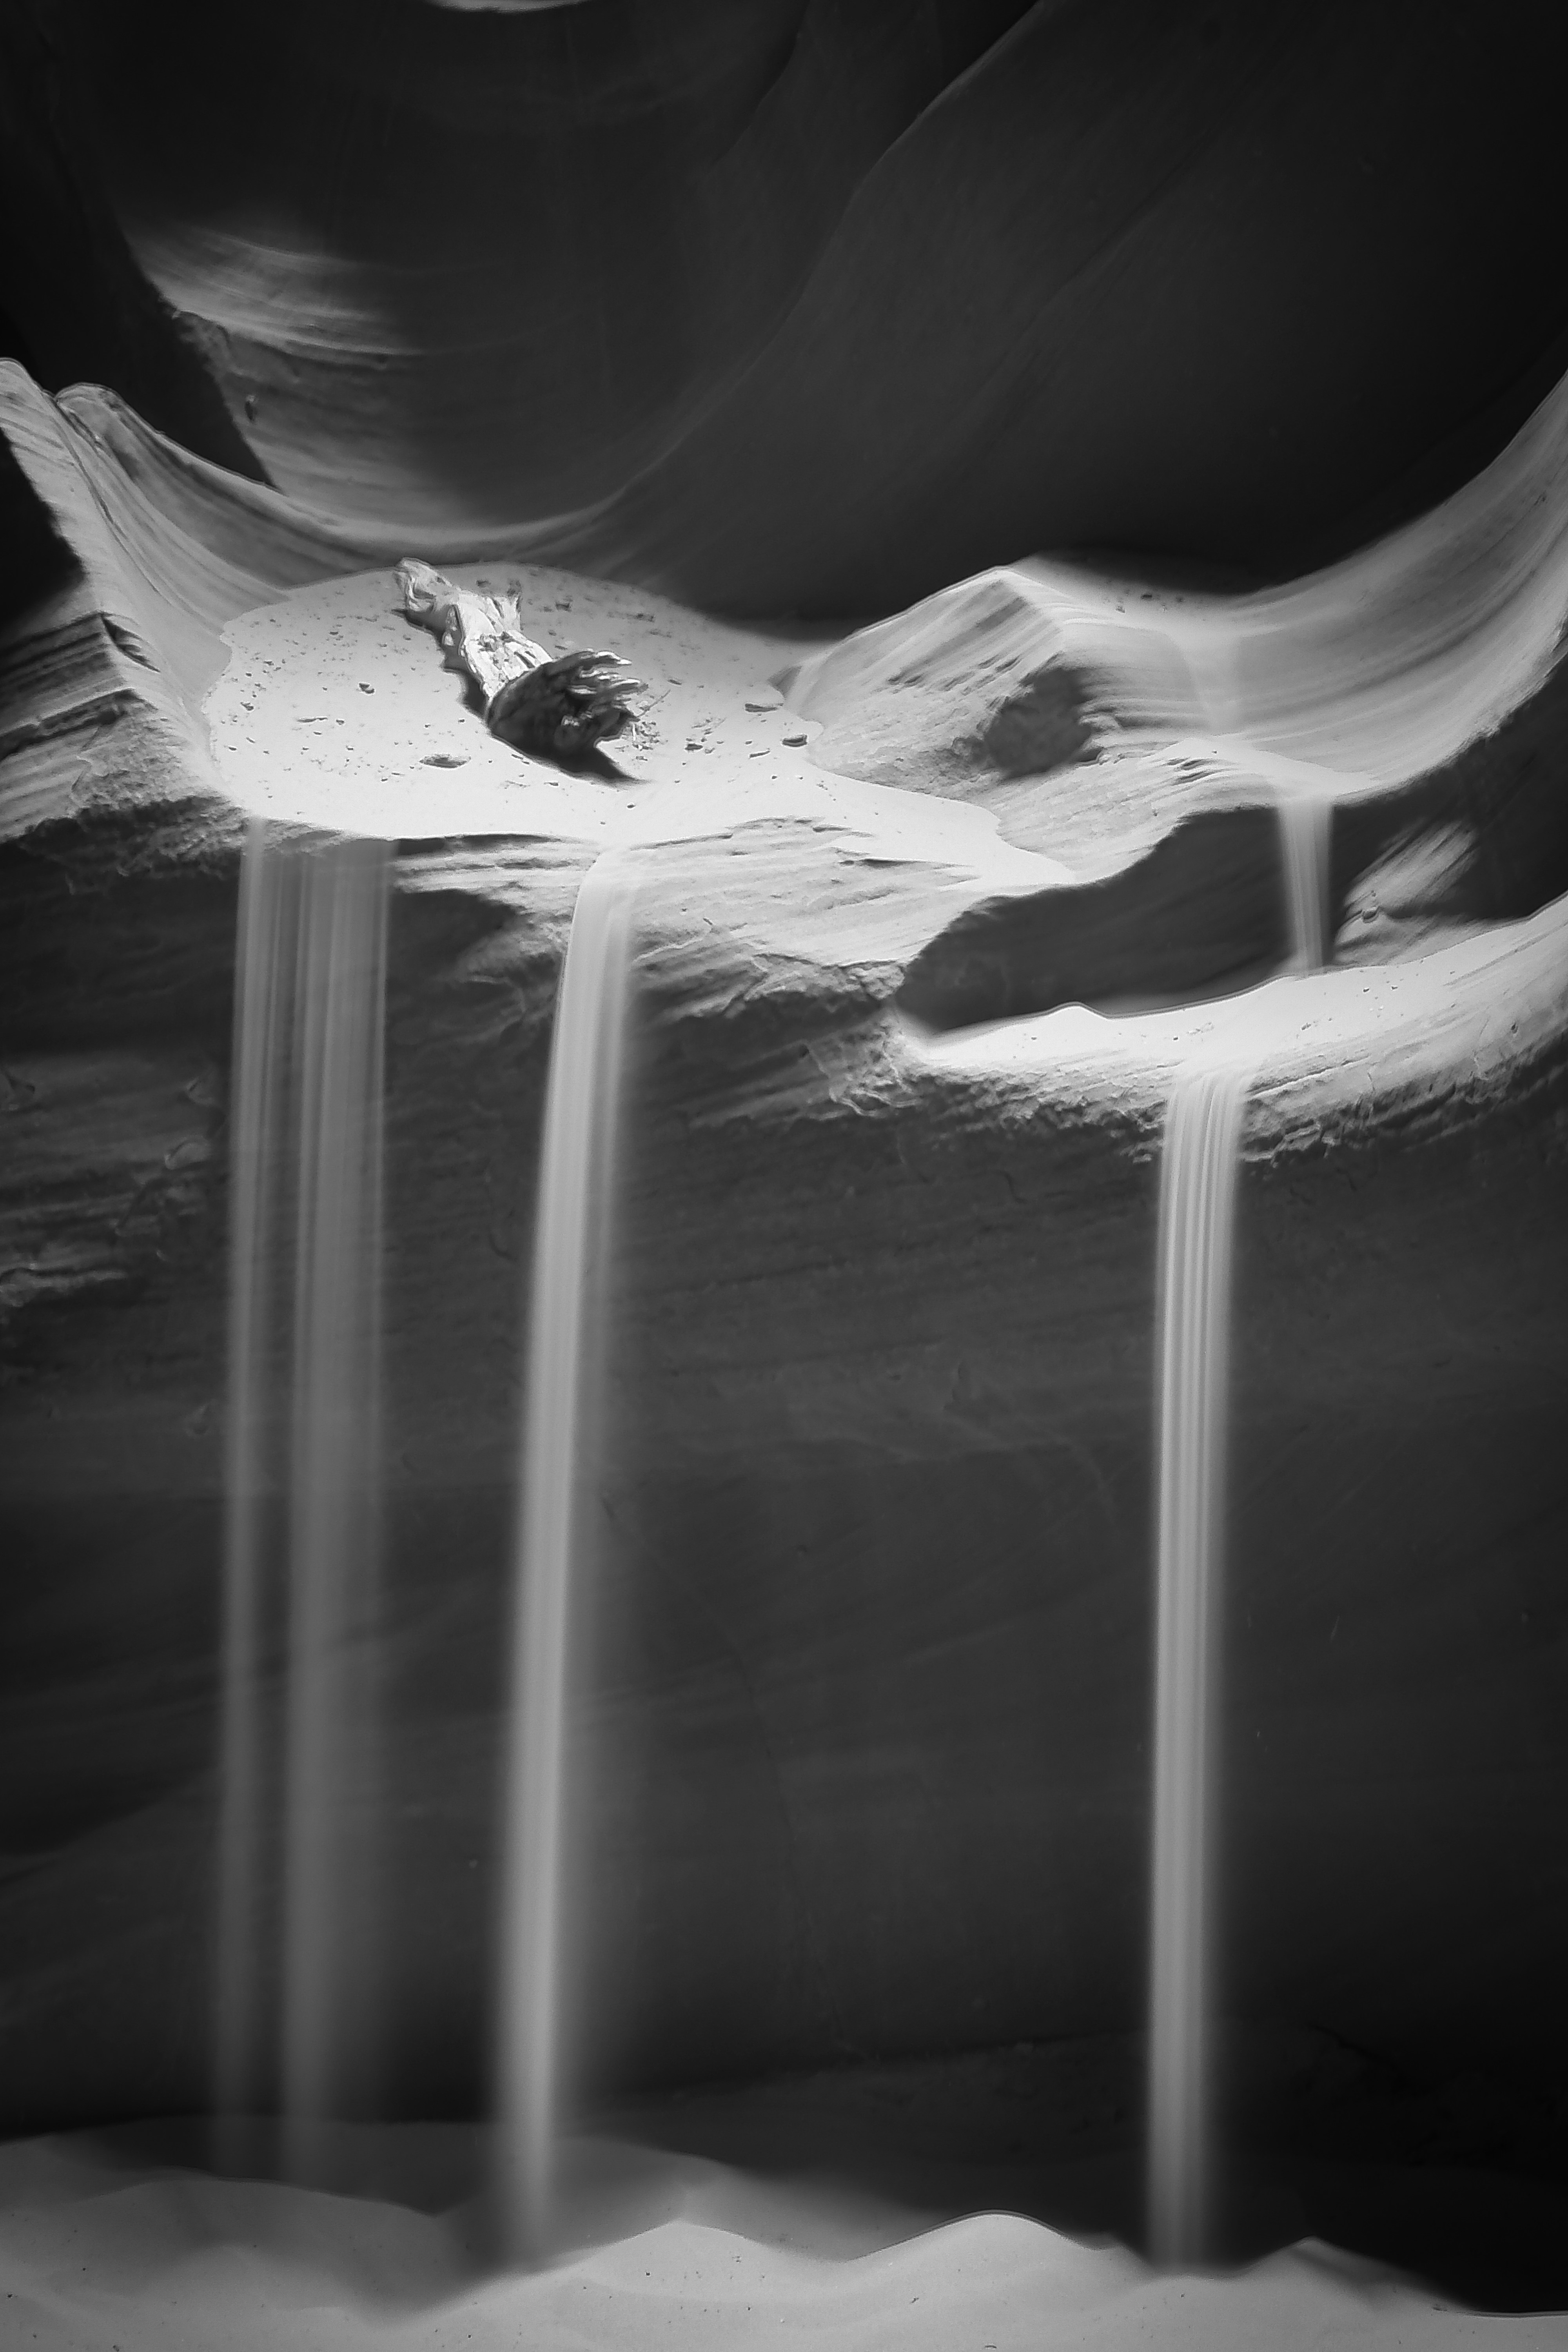 Sand fall at Antelope Canyon in black & white.